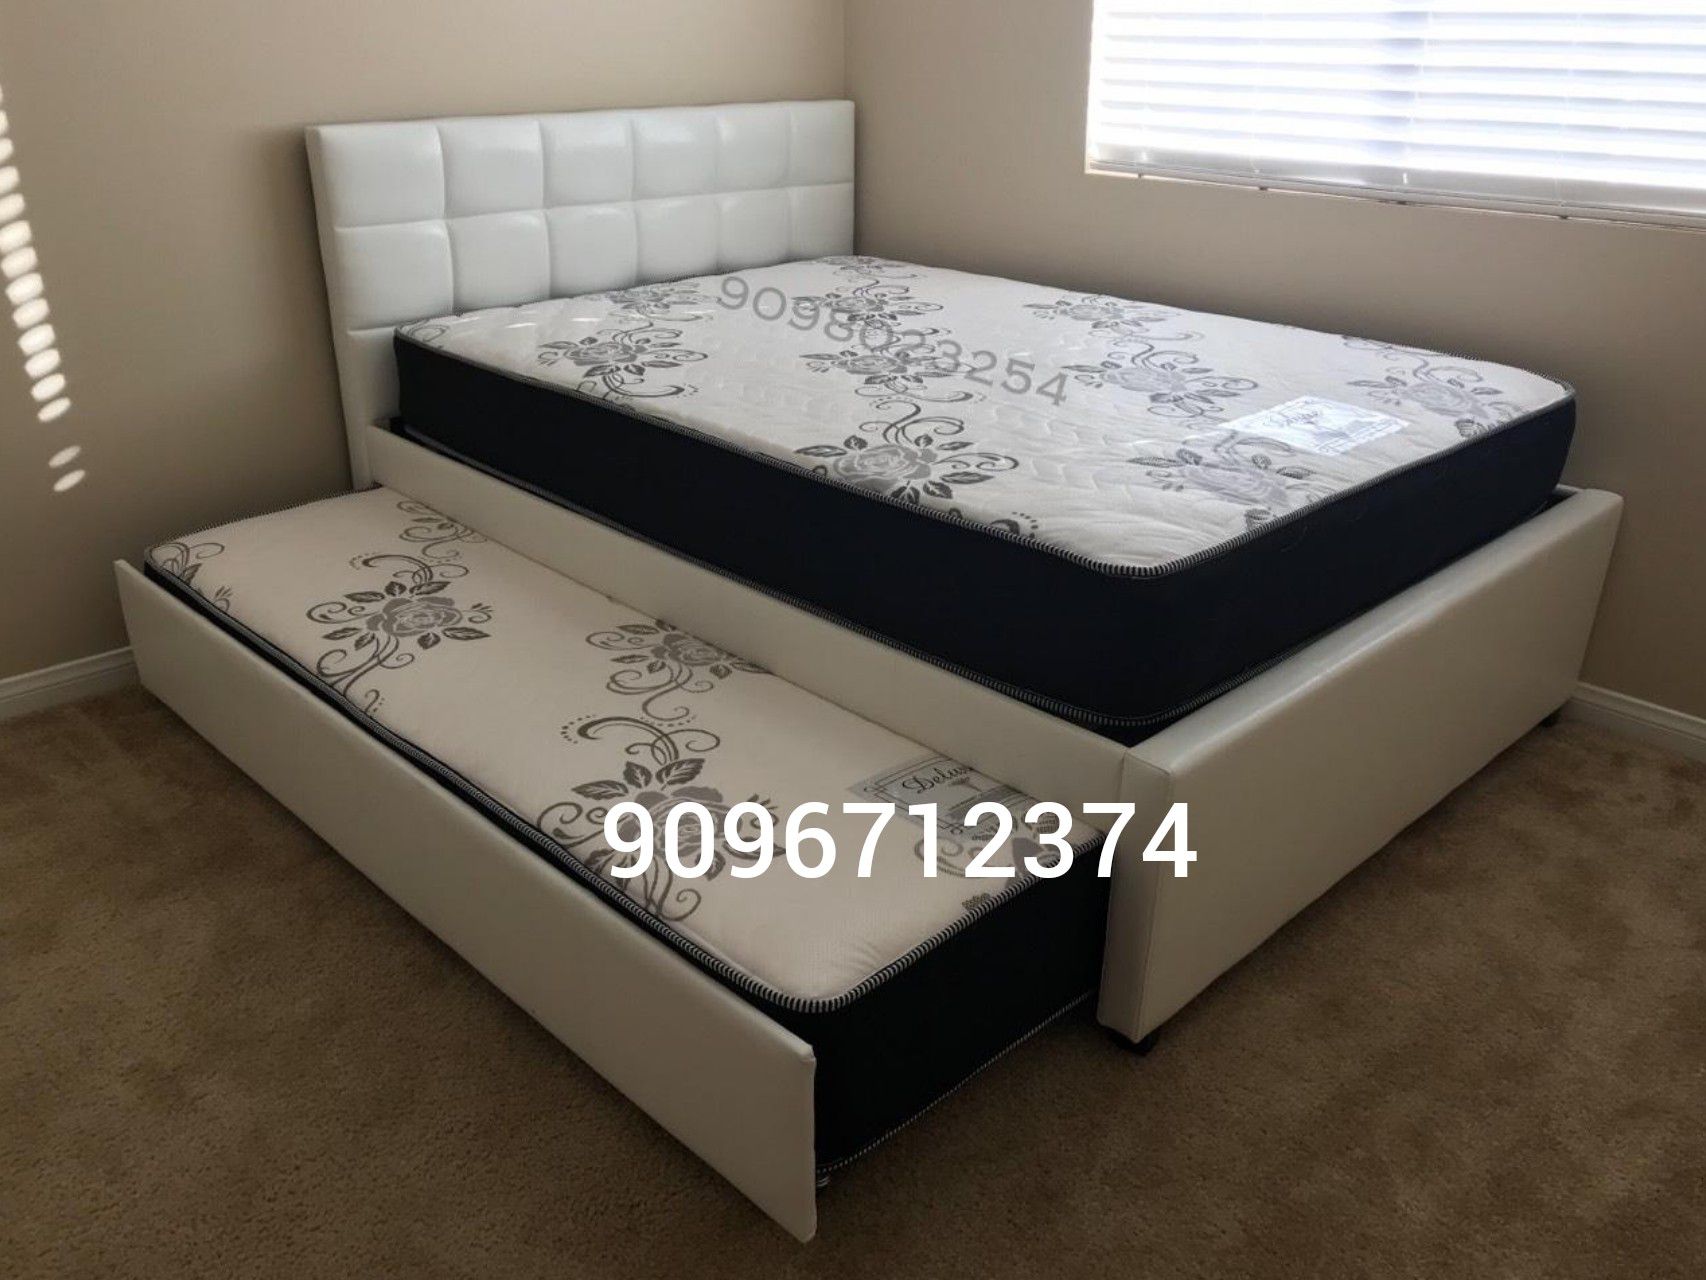 FULL/TWIN TRUNDLE BEDS W MATTRESSES INCLUDED.